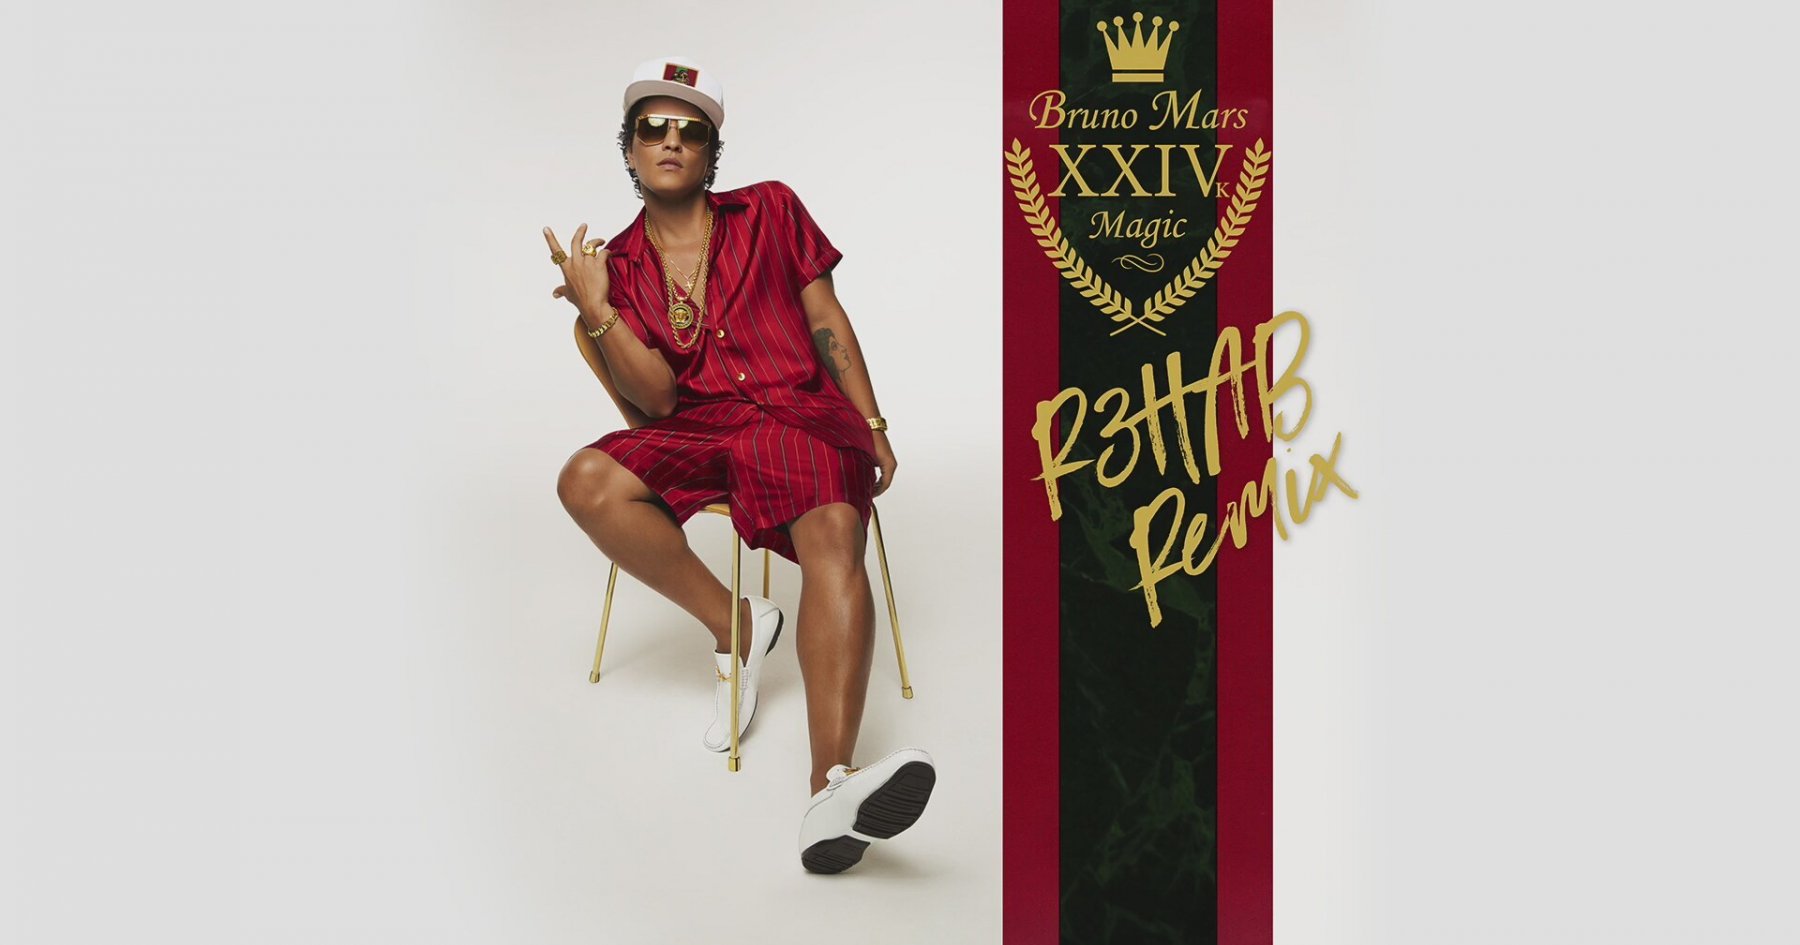 Bruno Mars Finds His Voice On '24k Magic'